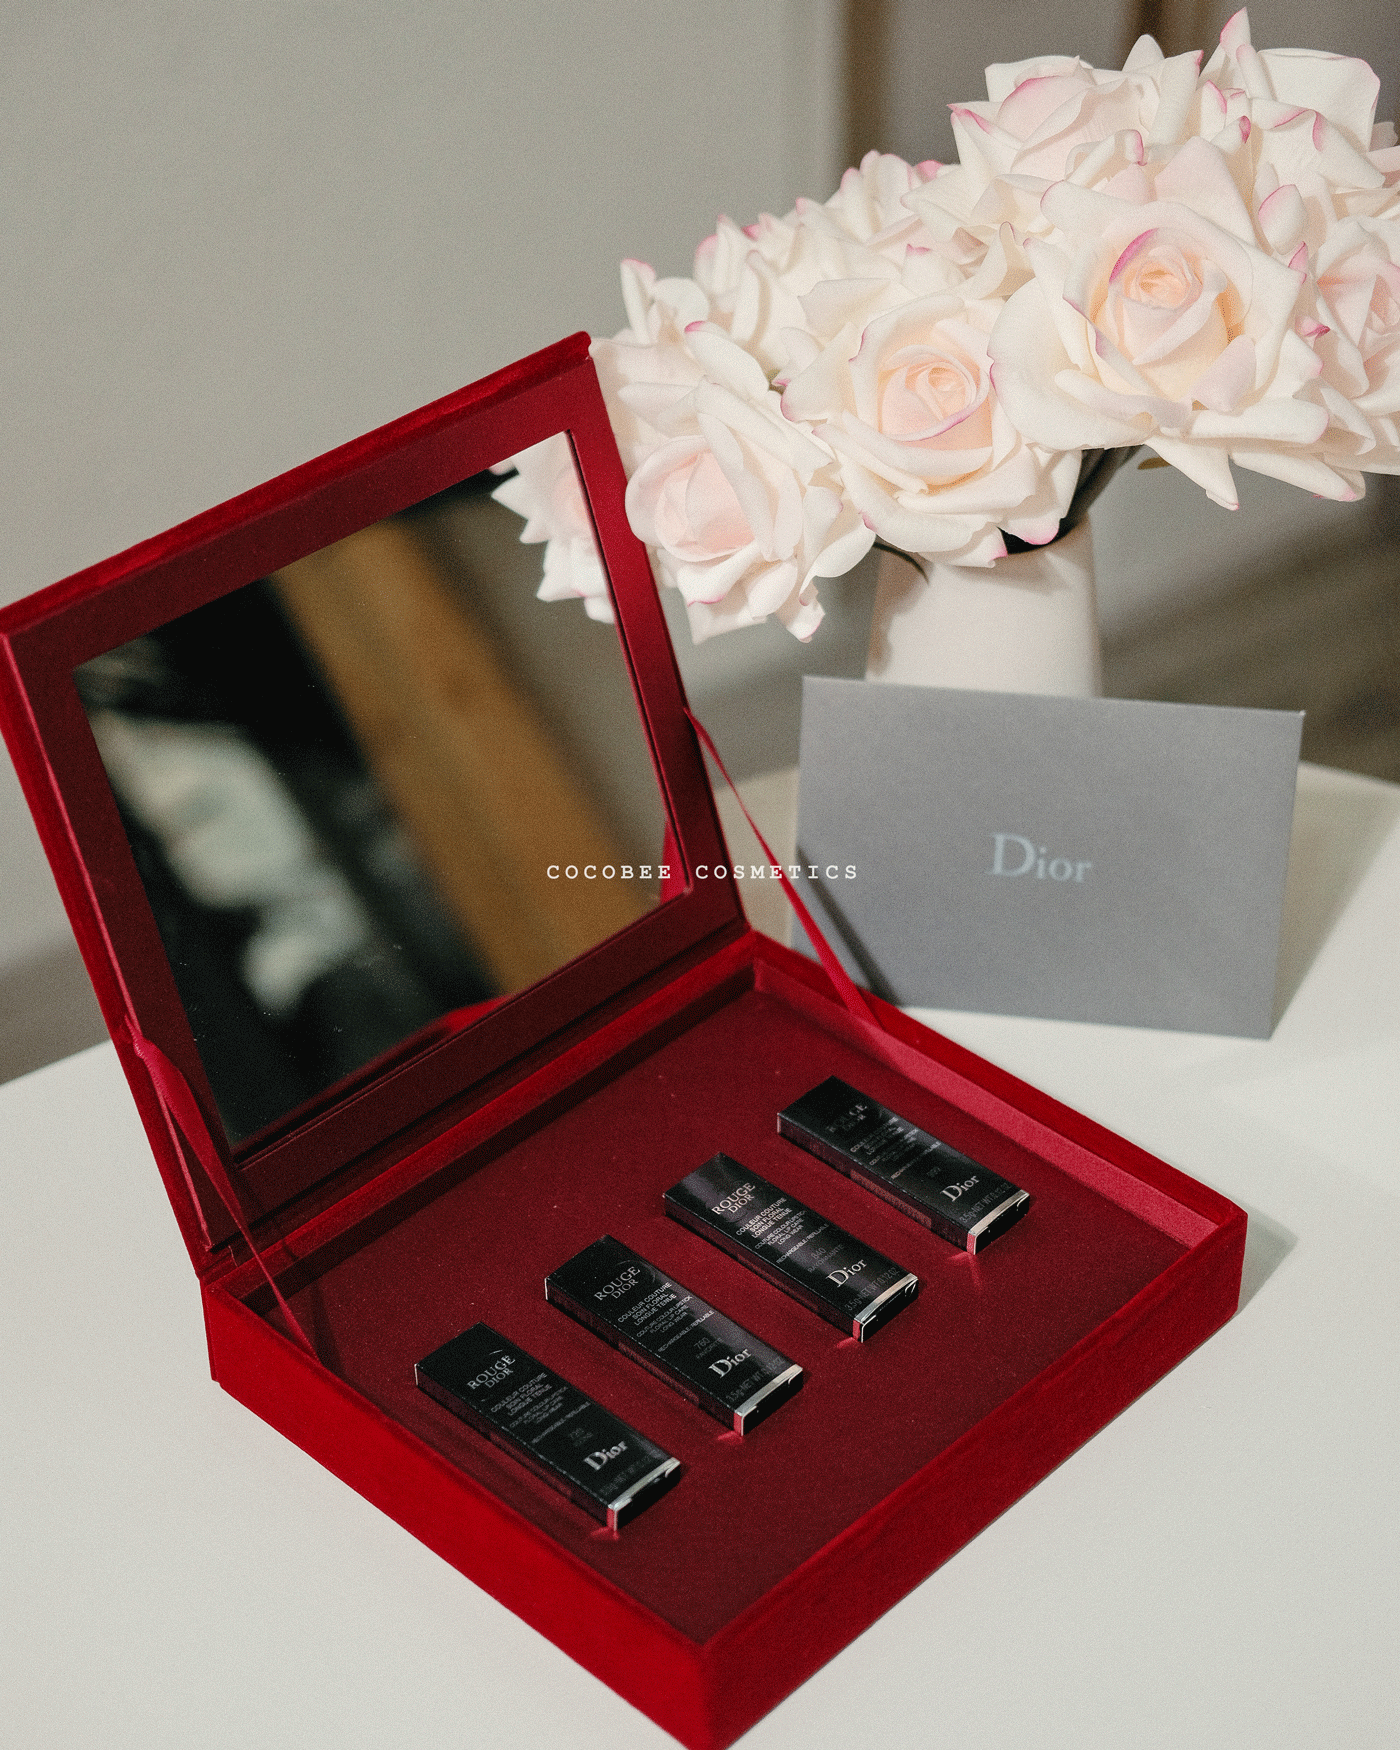 Gift SET SON DIOR Rouge Dior 4 Son Fullsize Limited Edition  Cocobee